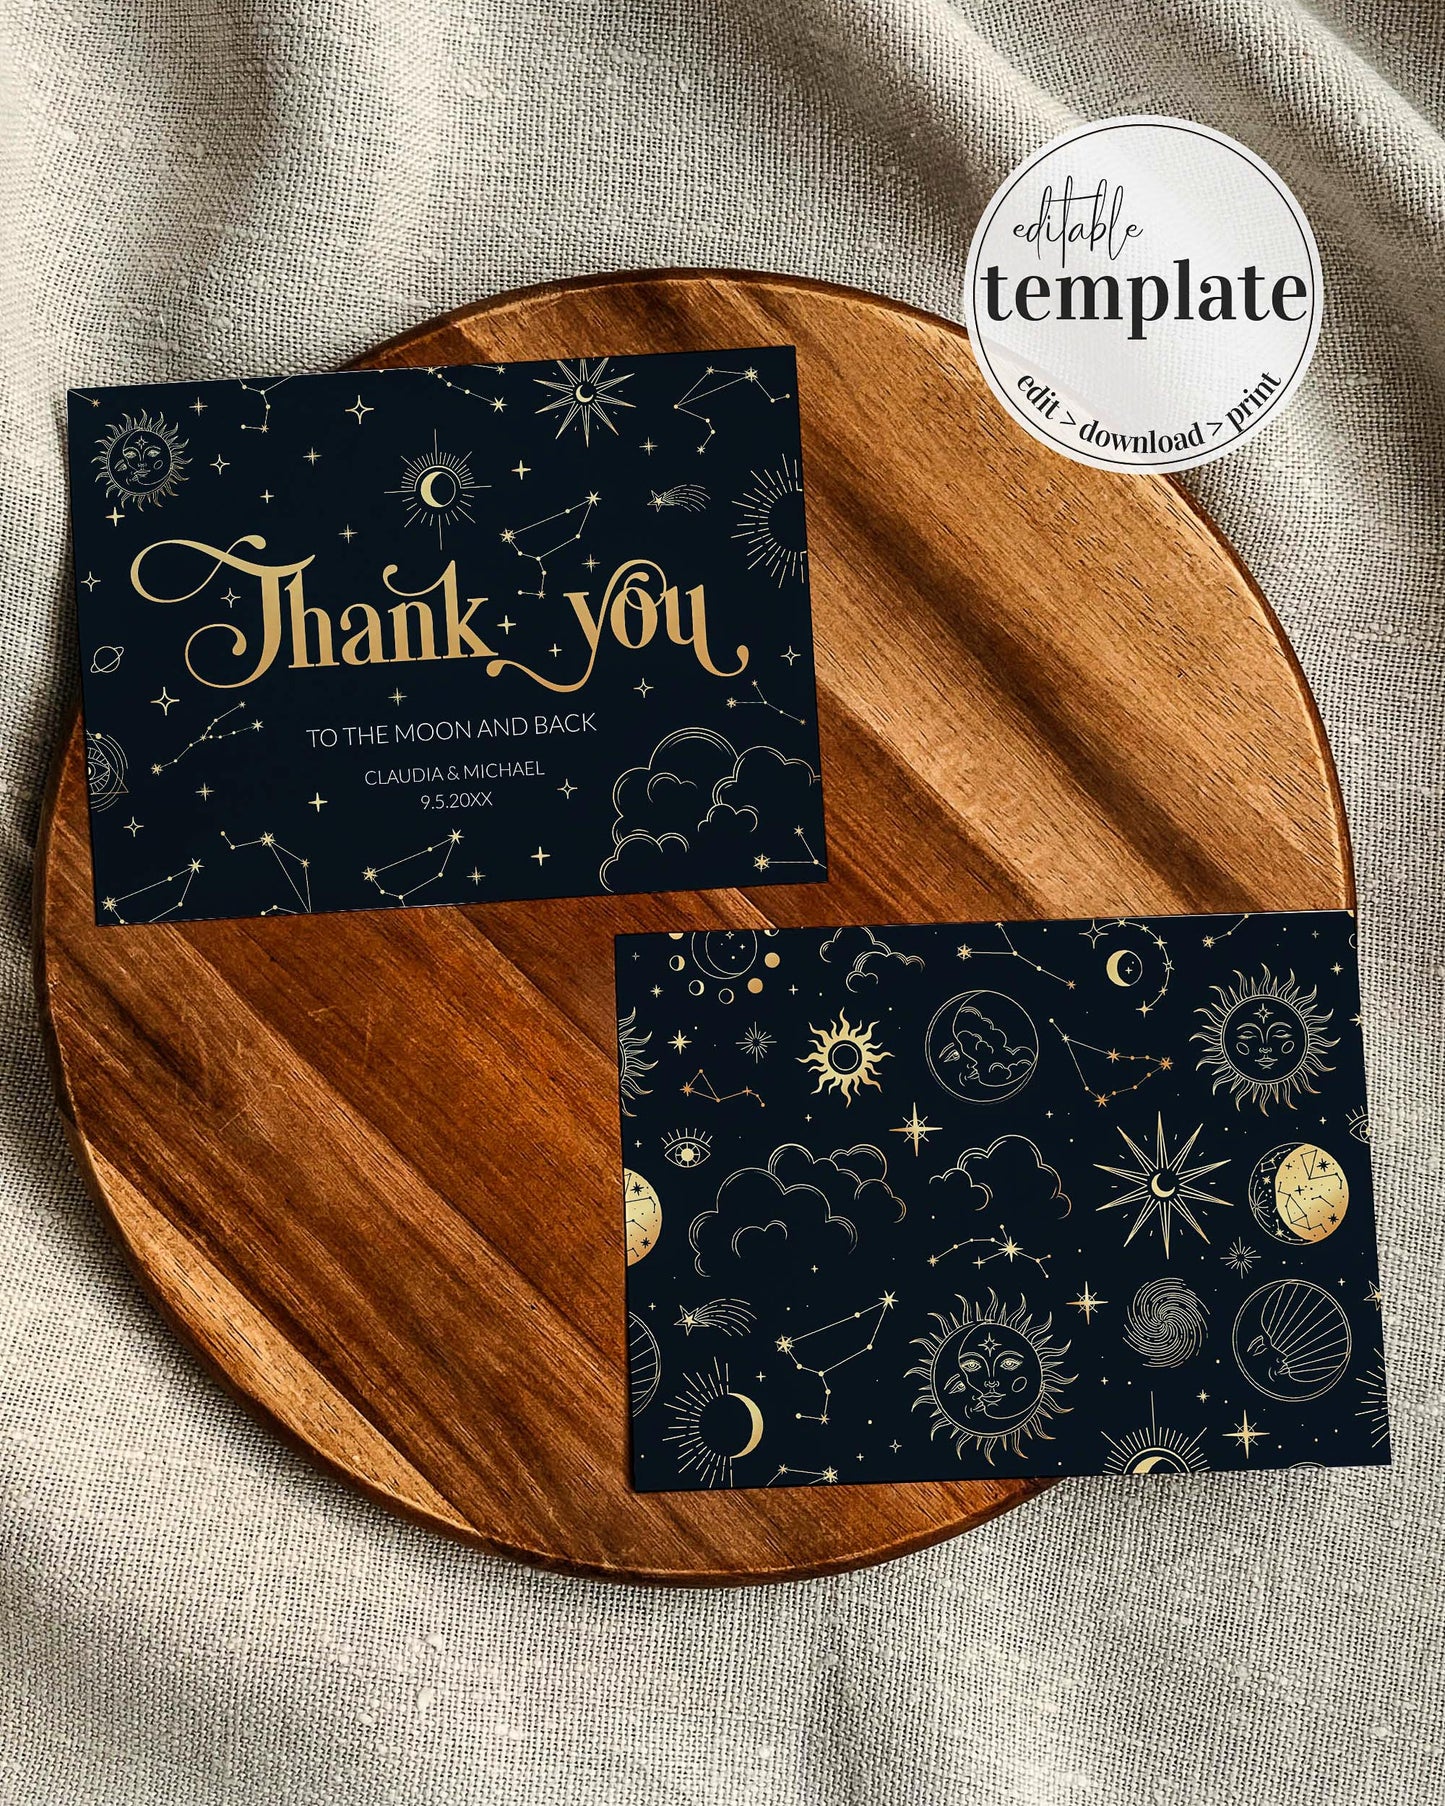 Thank you Card Template